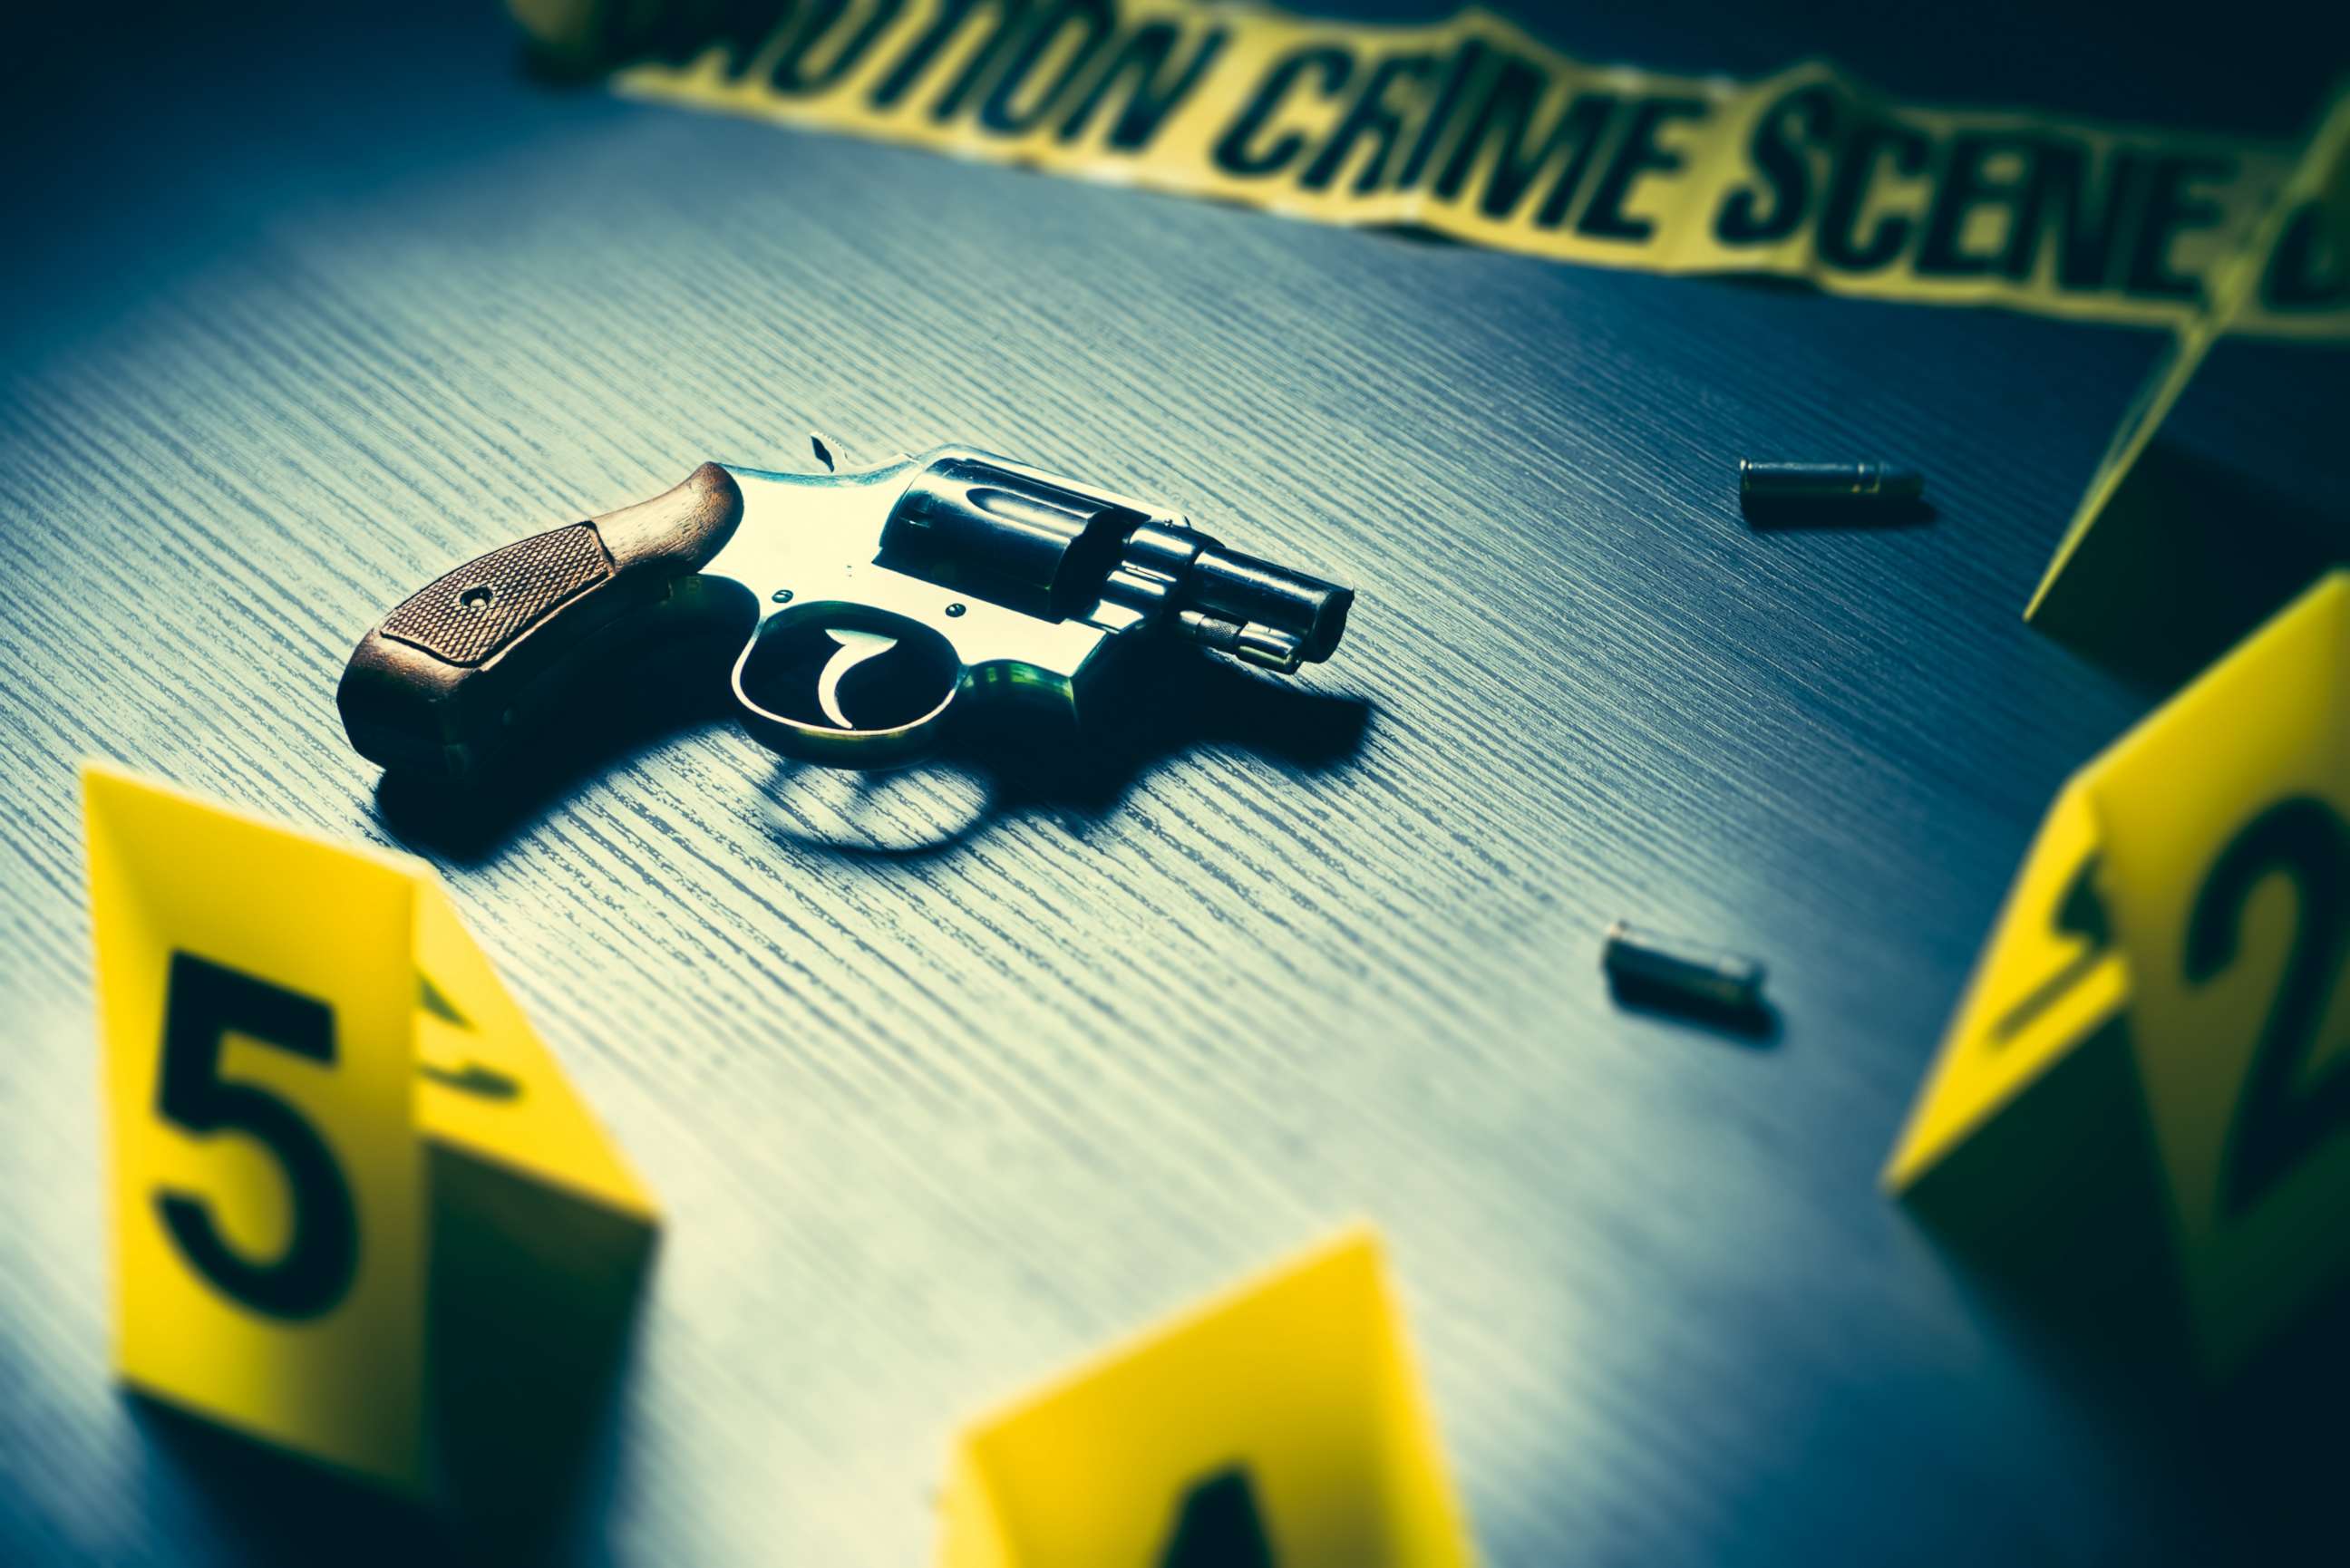 PHOTO: A crime scene with gun and markers on the floor is pictured in this undated stock photo.